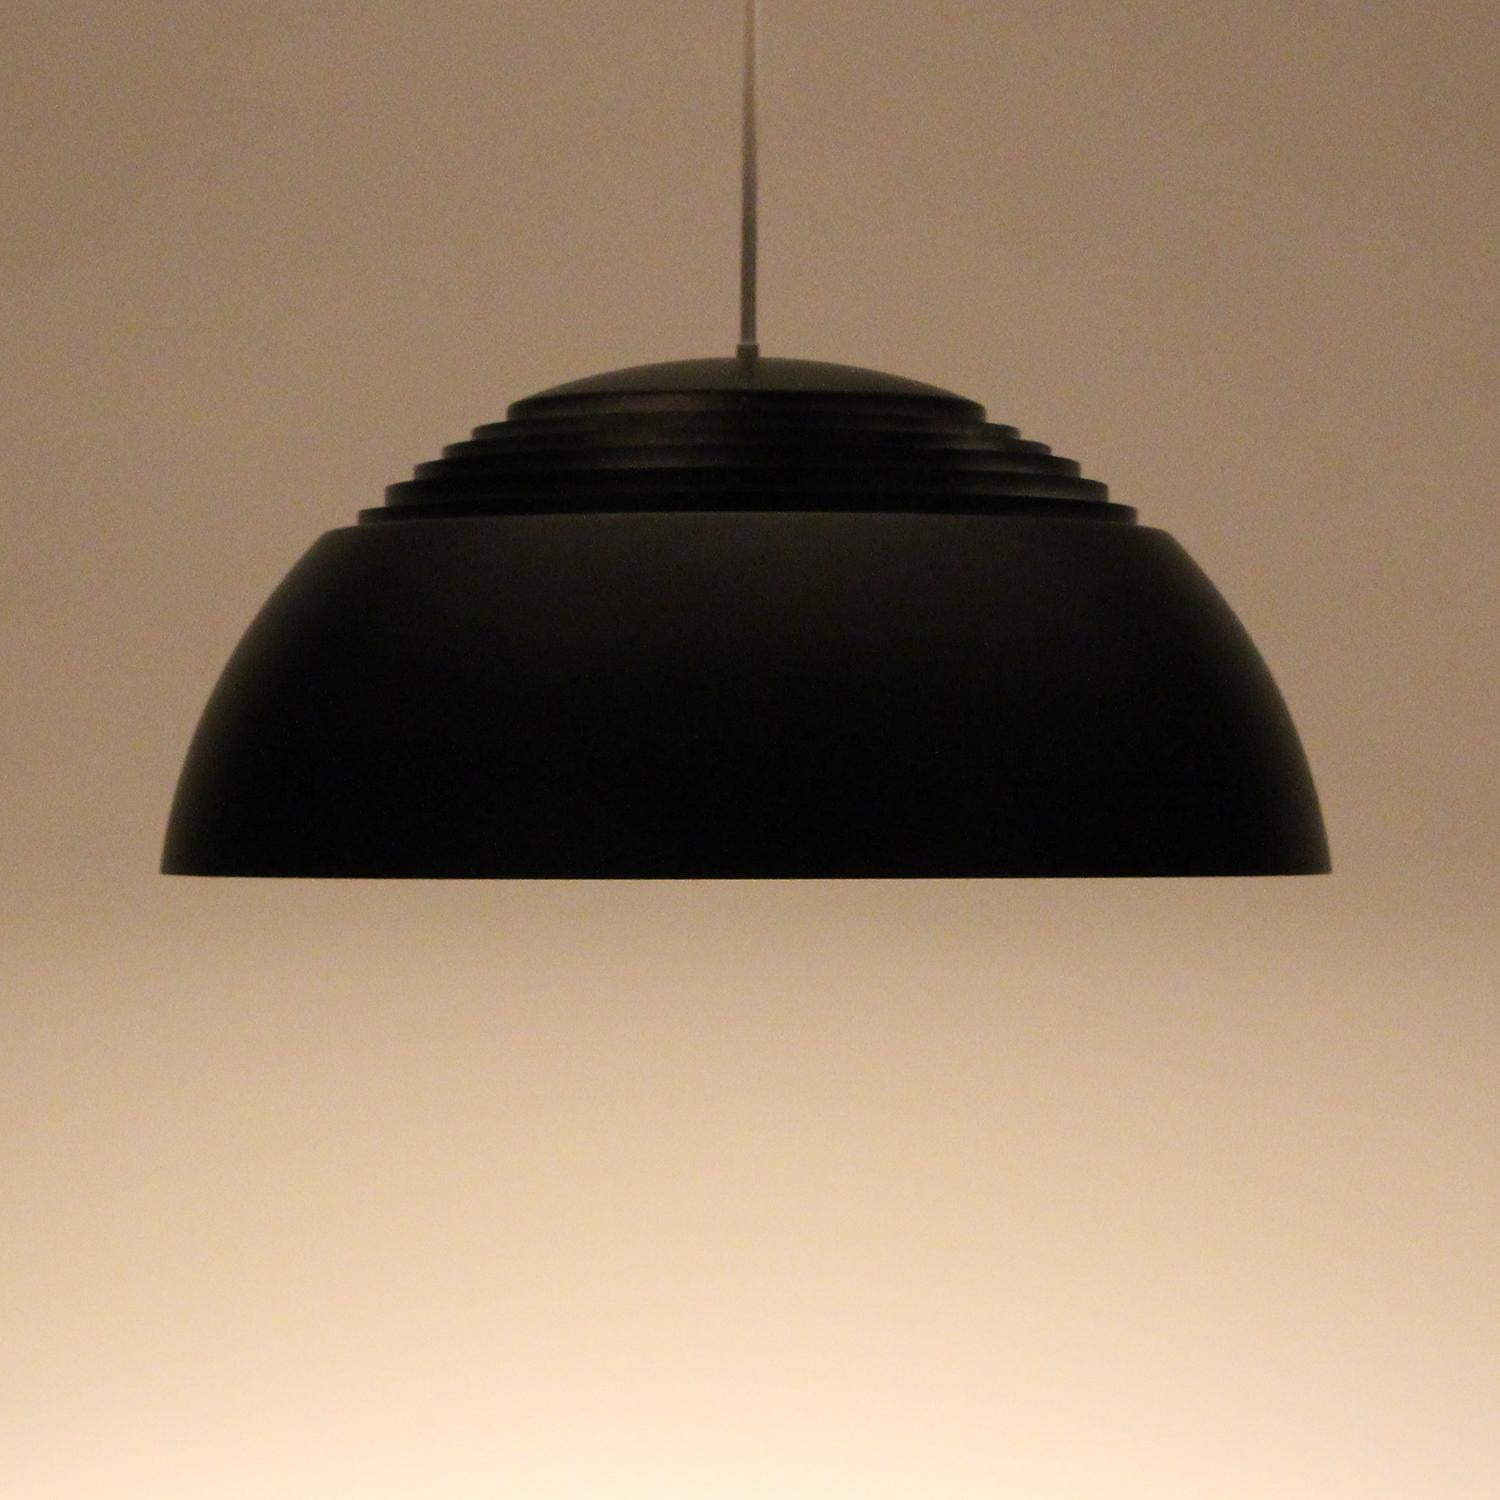 AJ PENDANT, also known as AJ ROYAL - designed by Arne Jacobsen in 1957, produced by Louis Poulsen - iconic Danish vintage design in rare excellent vintage condition!

A true timeless design piece made in spun aluminum and steel with black and white